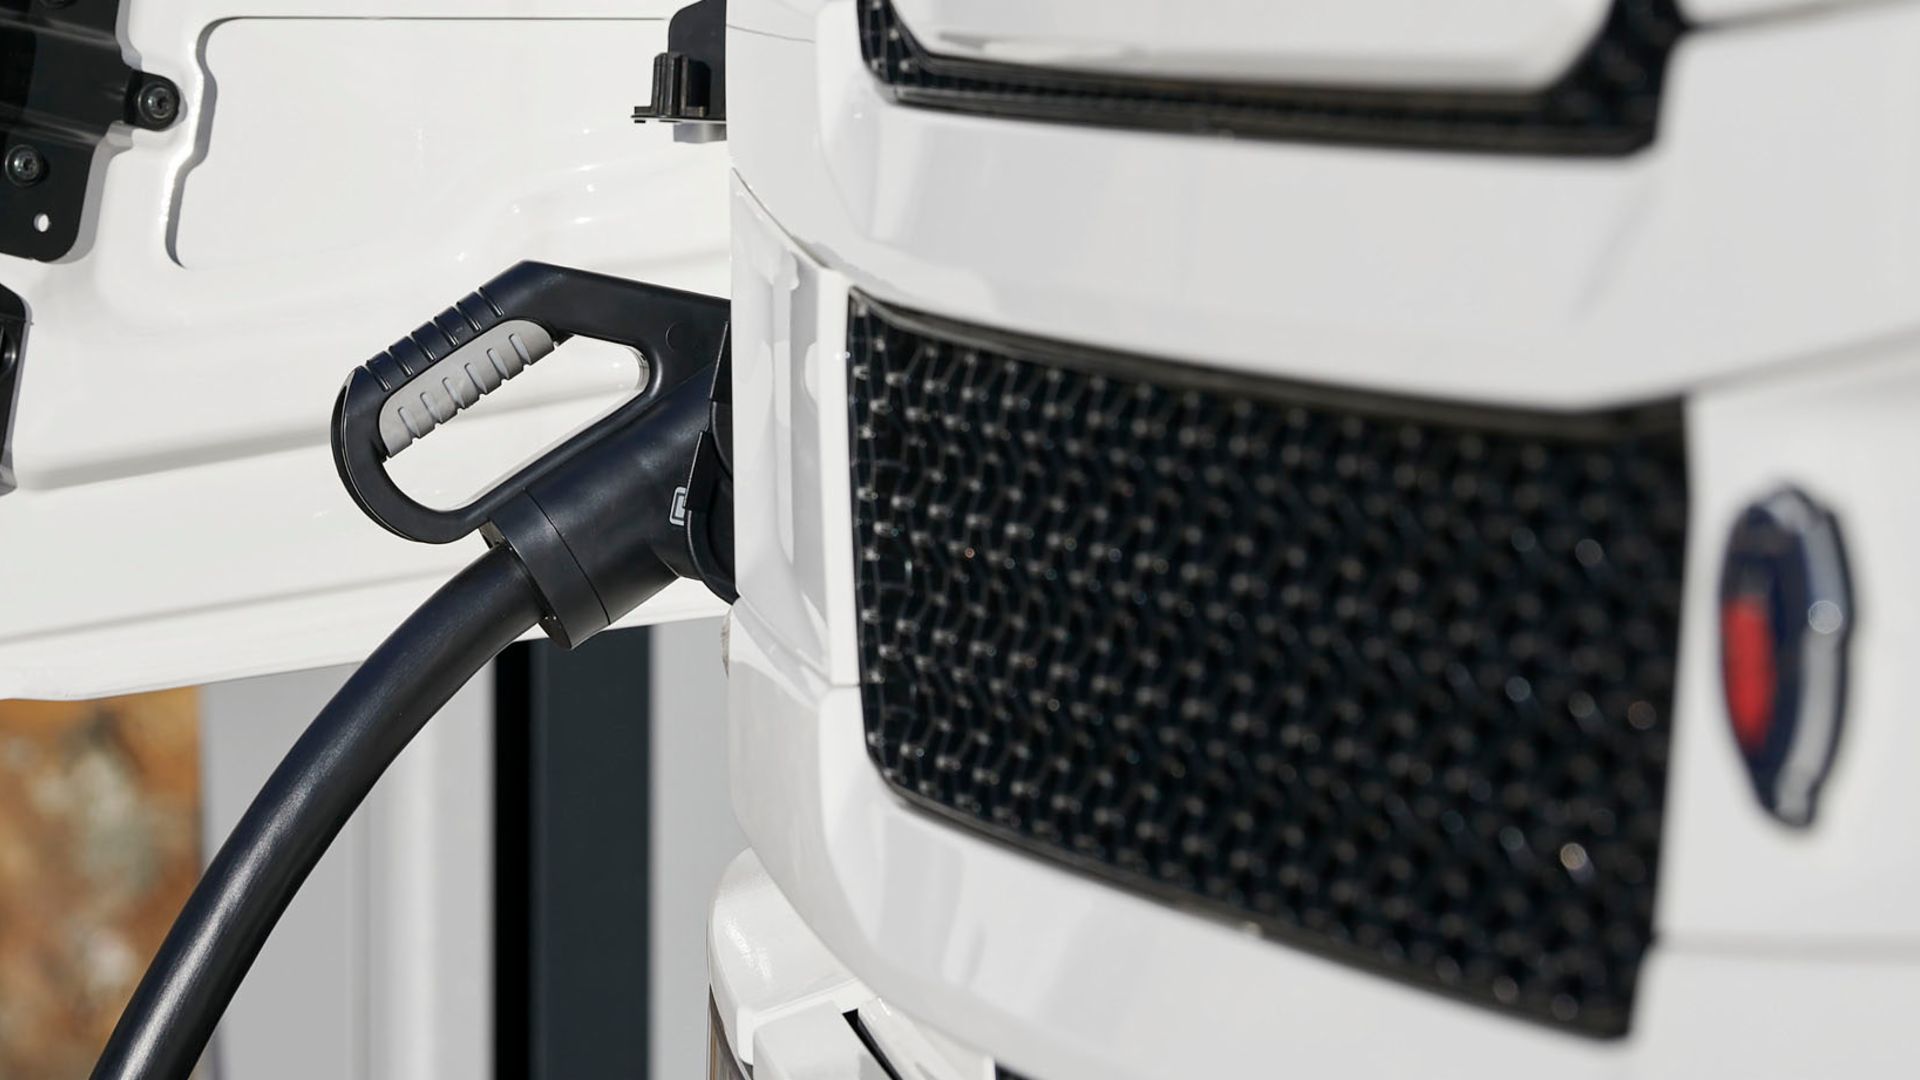 Scania launches service to simplify public charging for electric trucks and buses